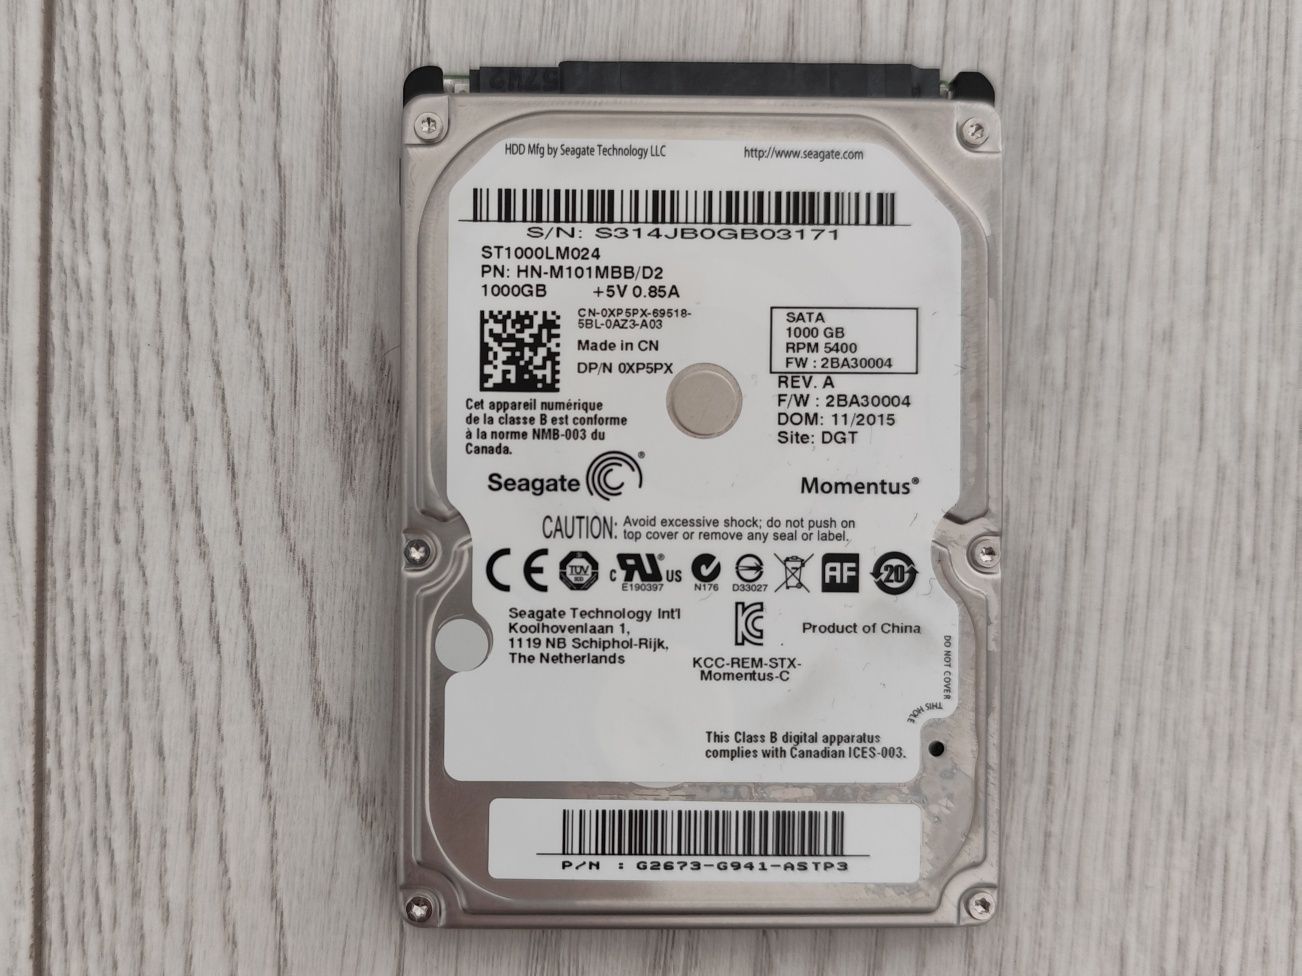 DYSK HDD 1TB 2.5" Seagate momentus ST1000LM024